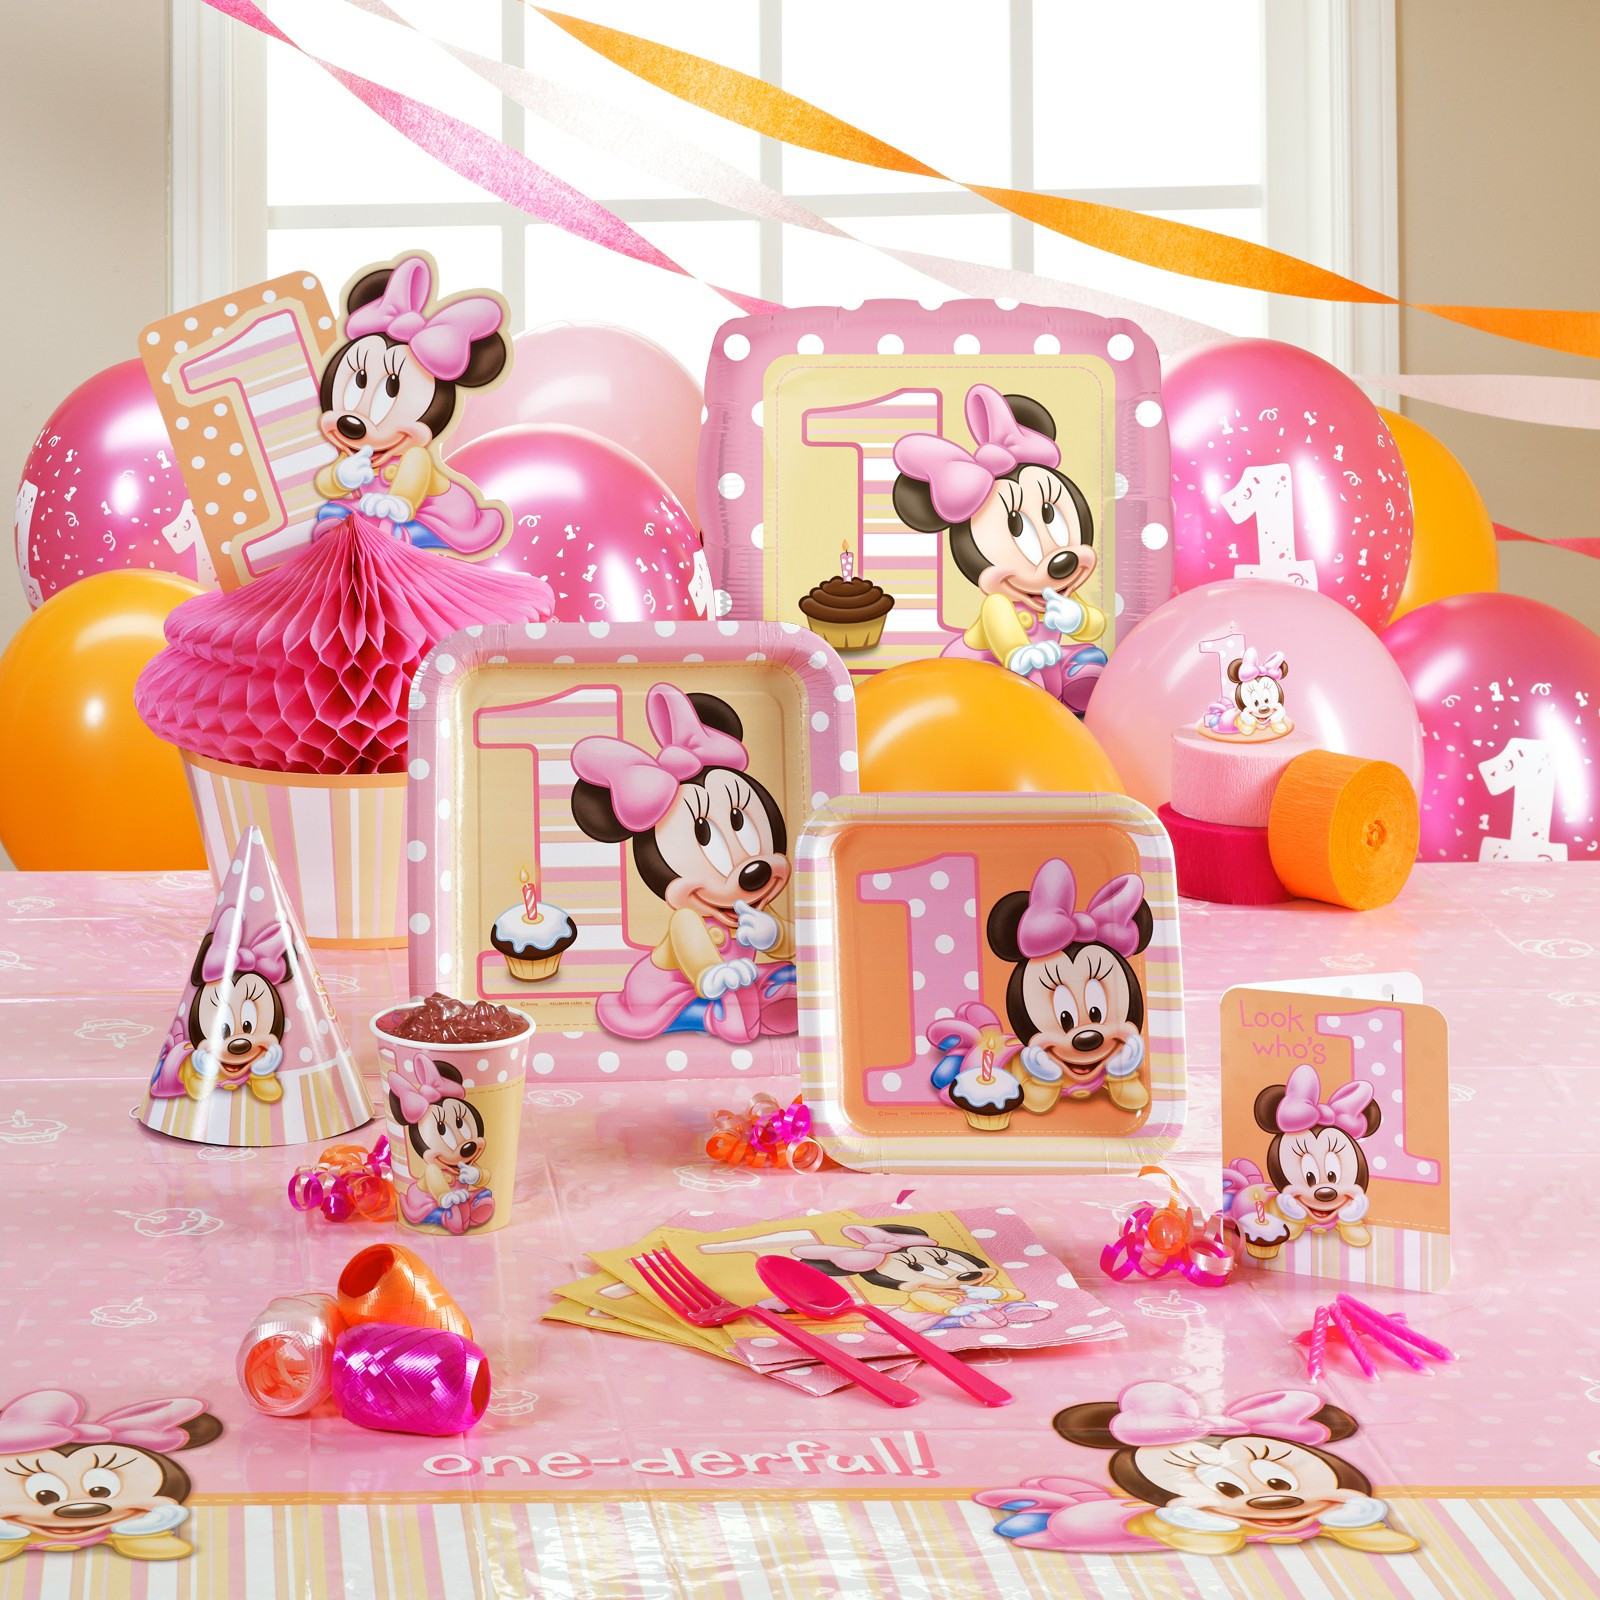 Minnie Mouse 1st Birthday Decorations
 Baby Minnie Mouse Decorations